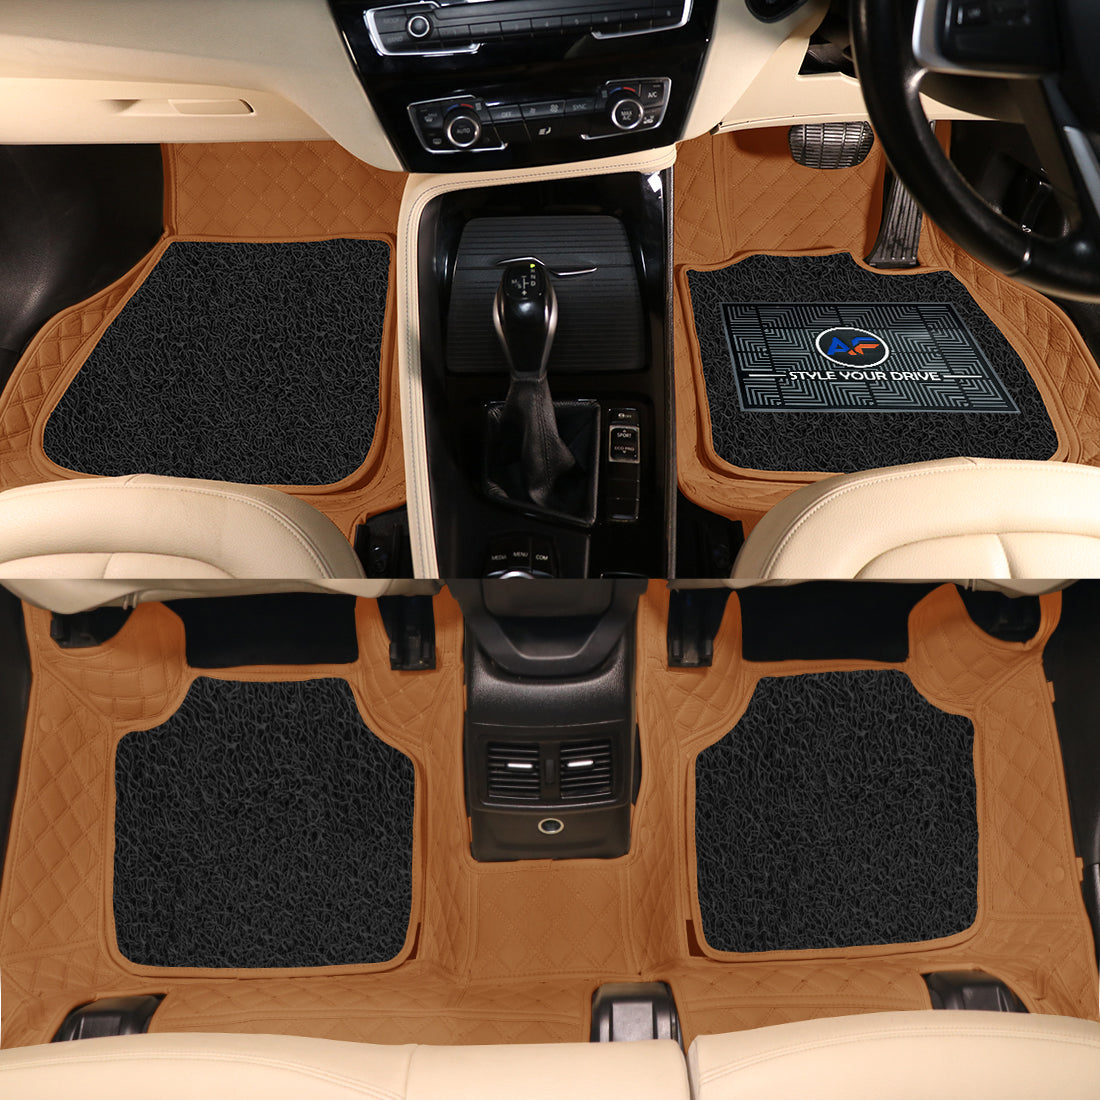 BMW 640D 7D Luxury Car Mat, All Weather Proof, Anti-Skid, 100% Waterproof & Odorless with Unique Diamond Fish Design (24mm Luxury PU Leather, 2 Rows)